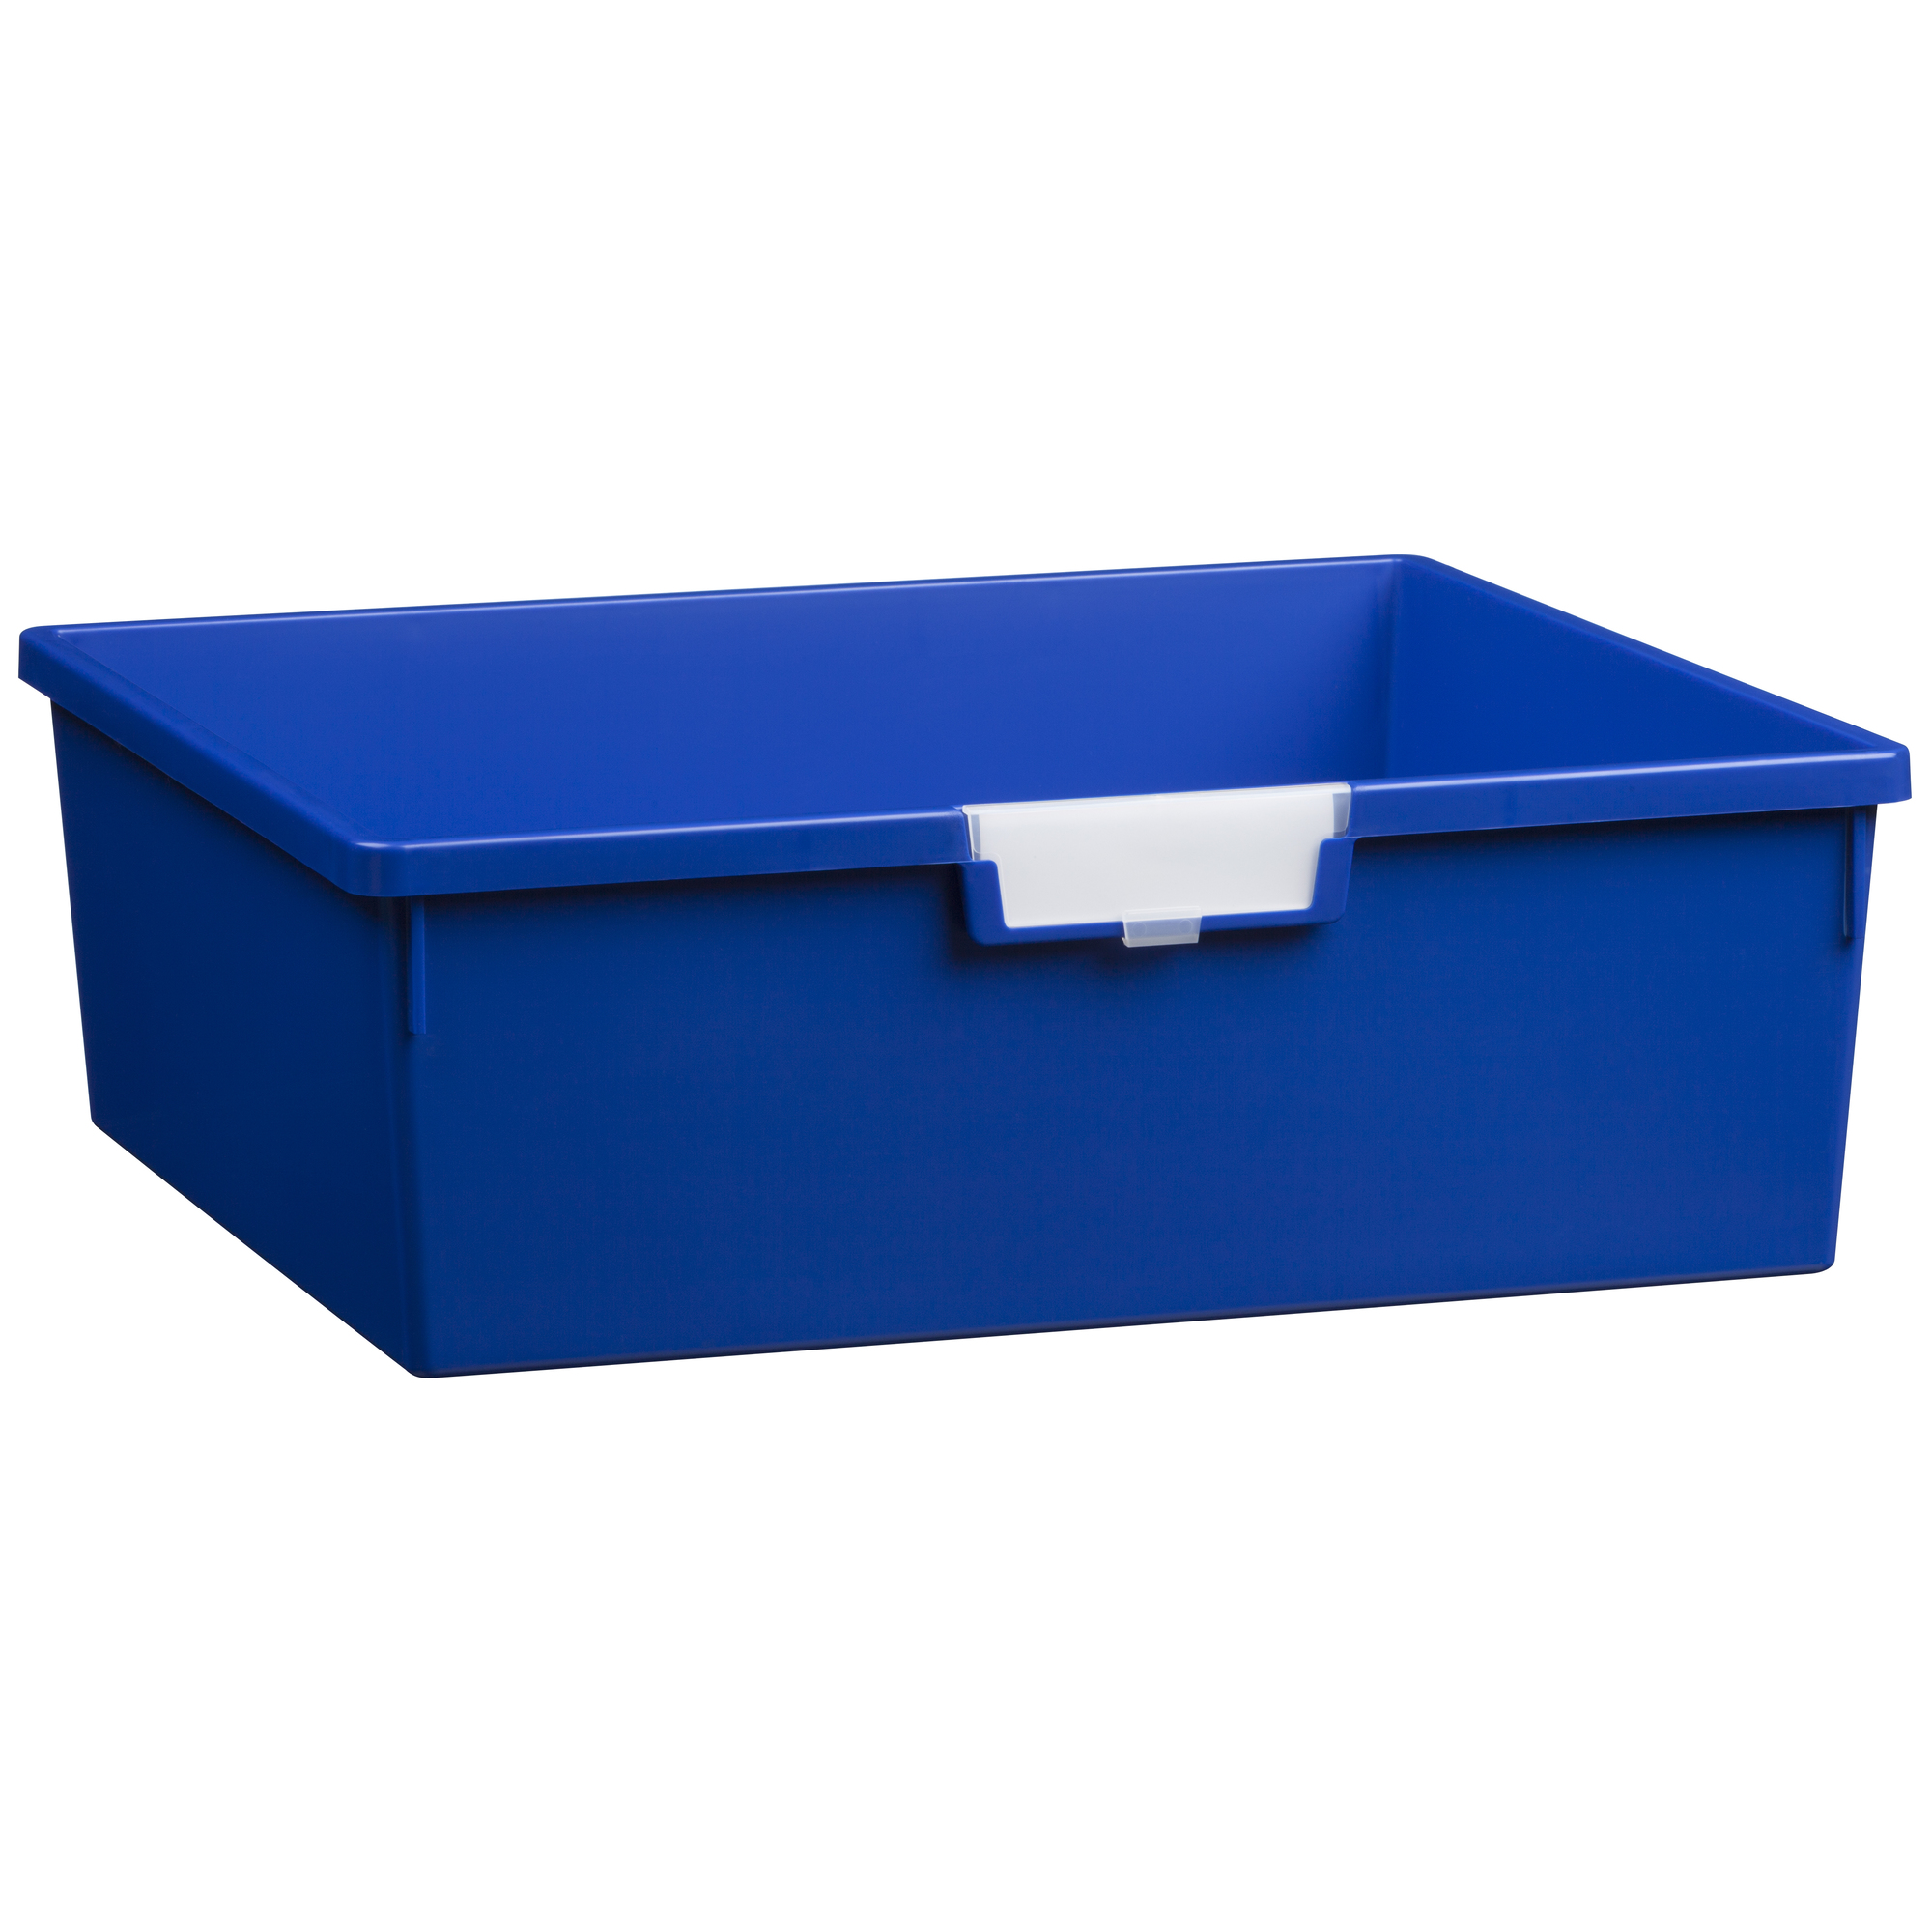 Certwood StorWerks, Wide Line 6Inch Tray in Primary Blue-3PK, Included (qty.) 3, Material Plastic, Height 6 in, Model CE1958PB3